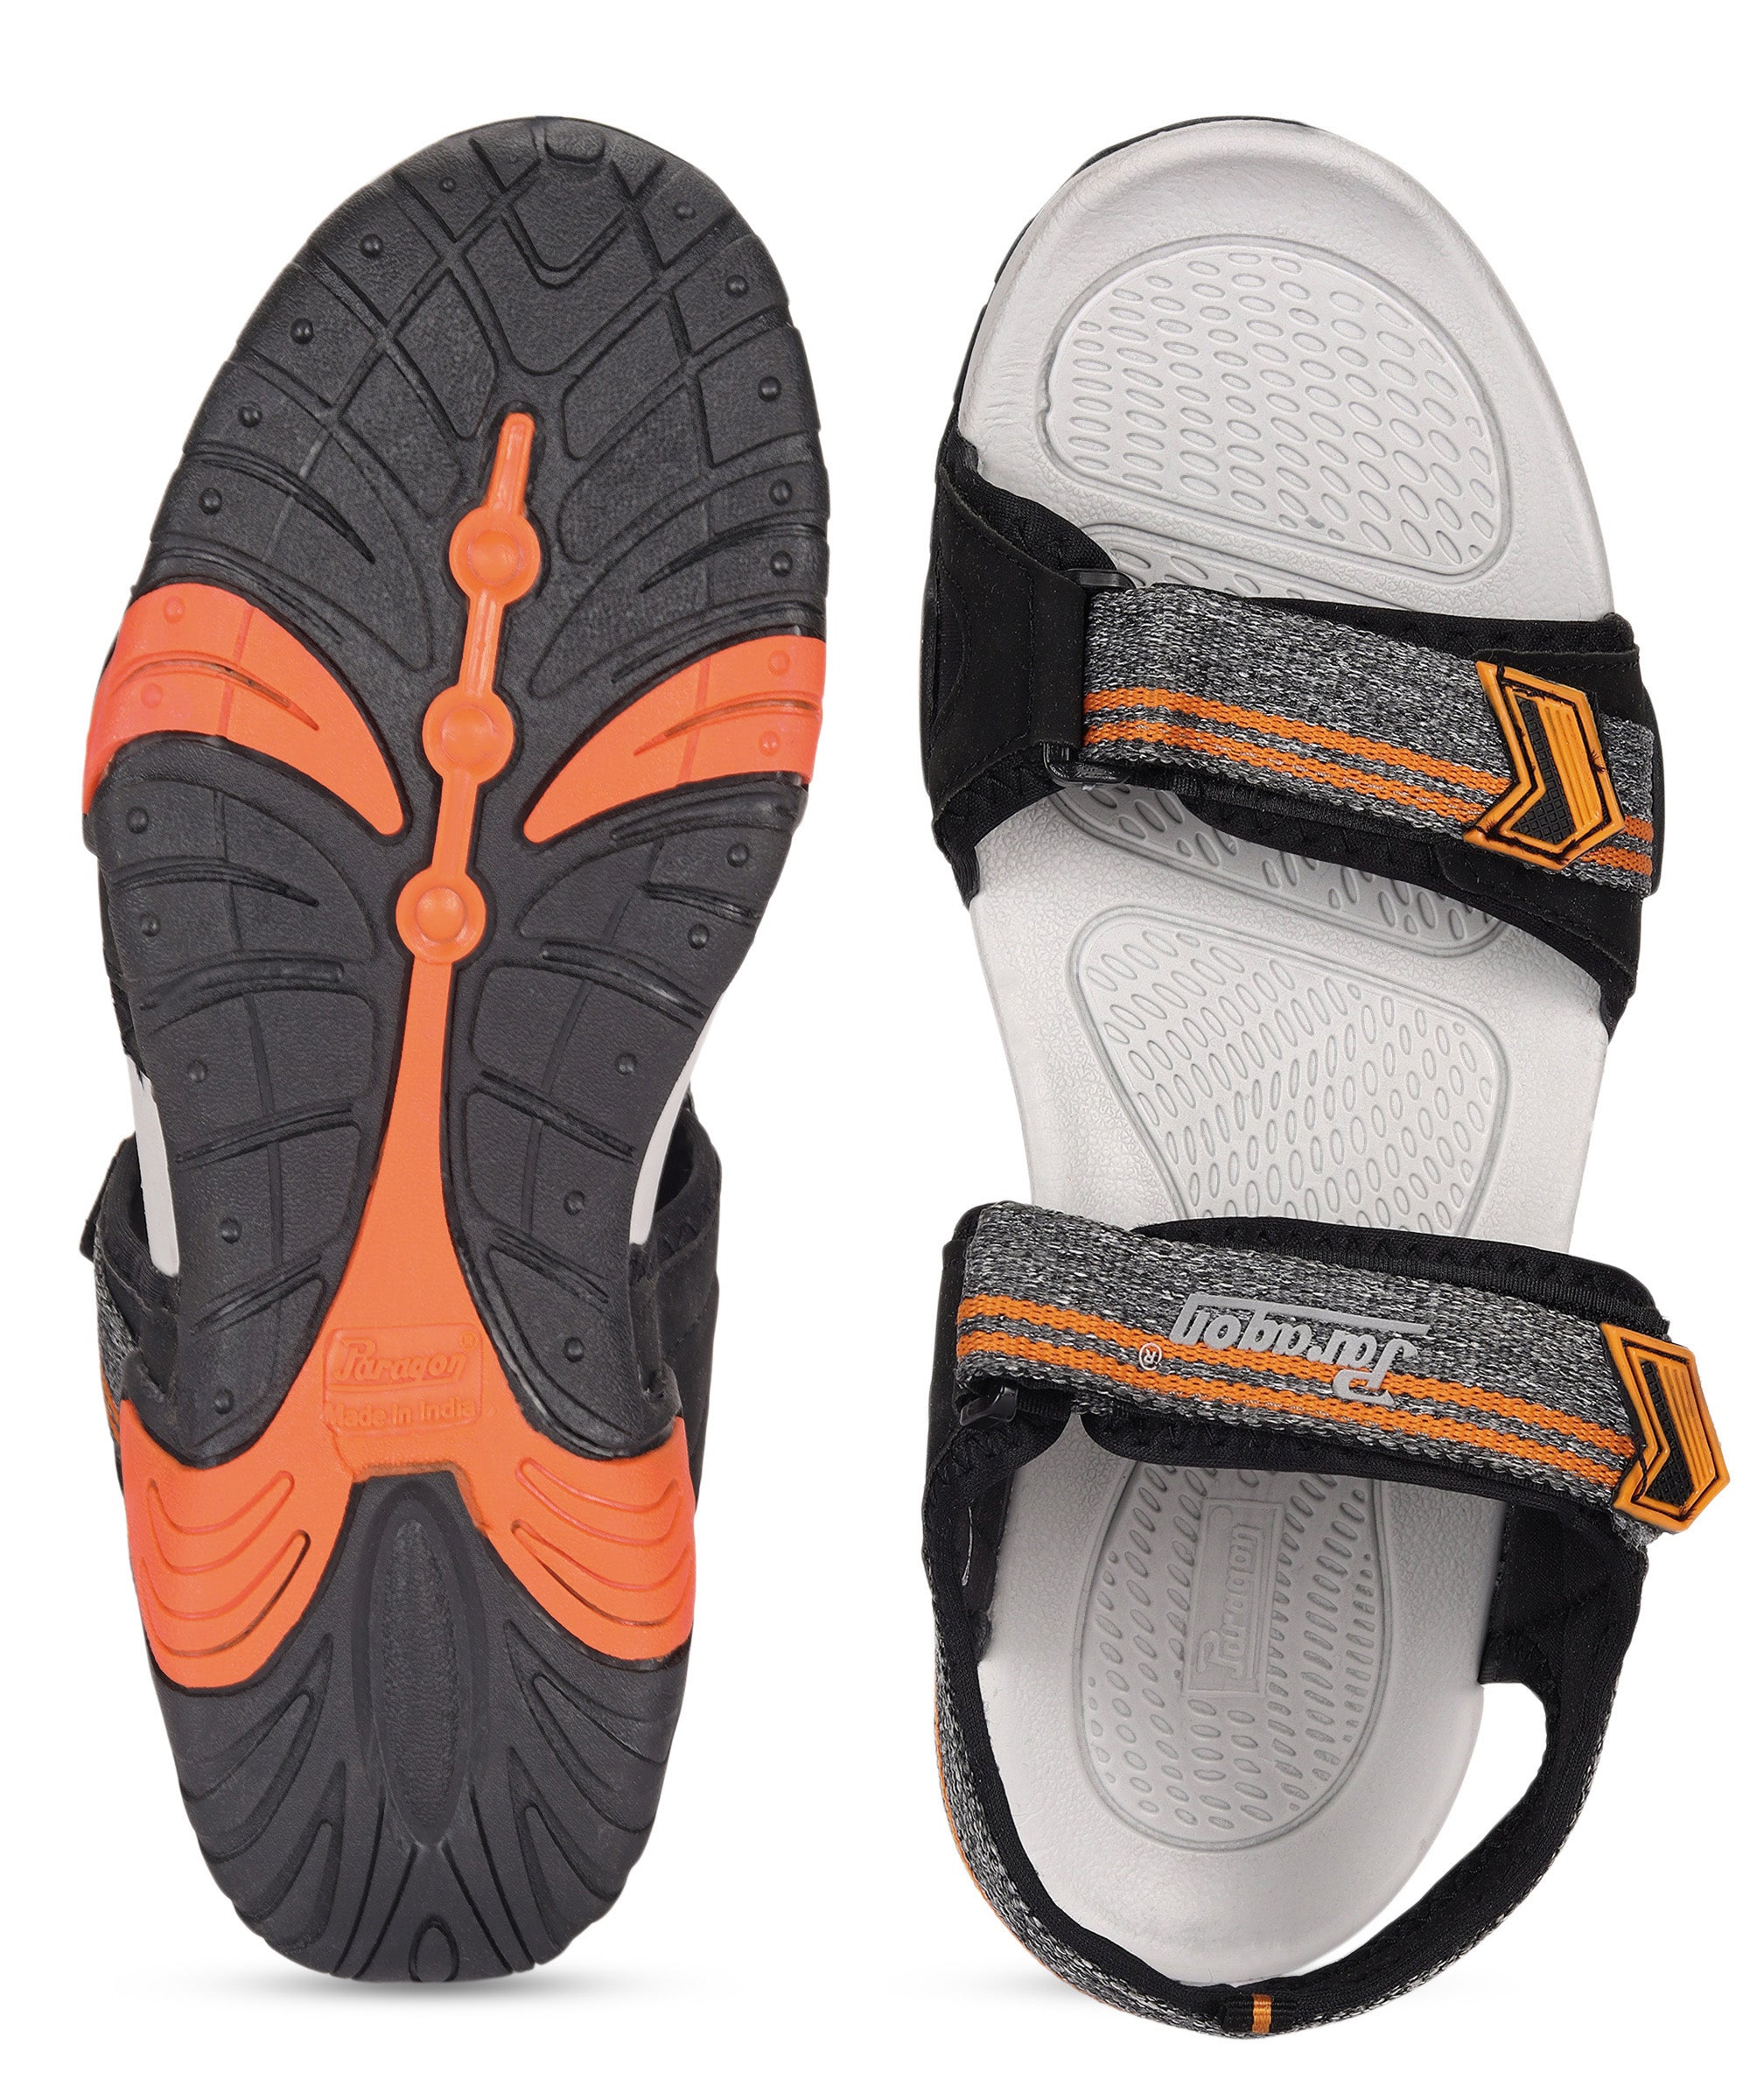 Paragon FBK1411G Men Stylish Sandals | Comfortable Sandals for Daily Outdoor Use | Casual Formal Sandals with Cushioned Soles